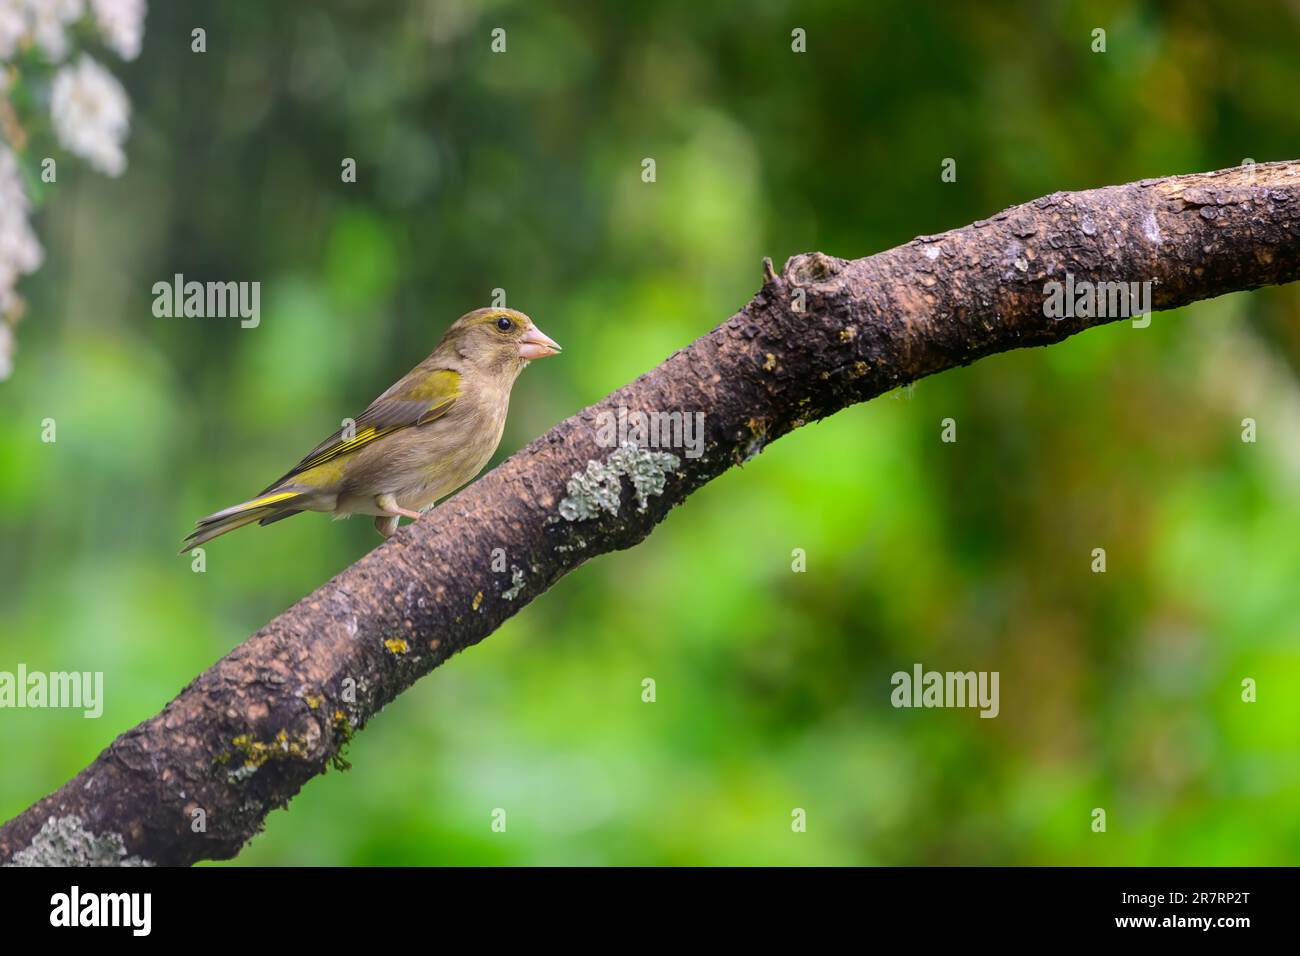 Female Greenfinch, Chloris chloris, perched on a tree branch Stock Photo